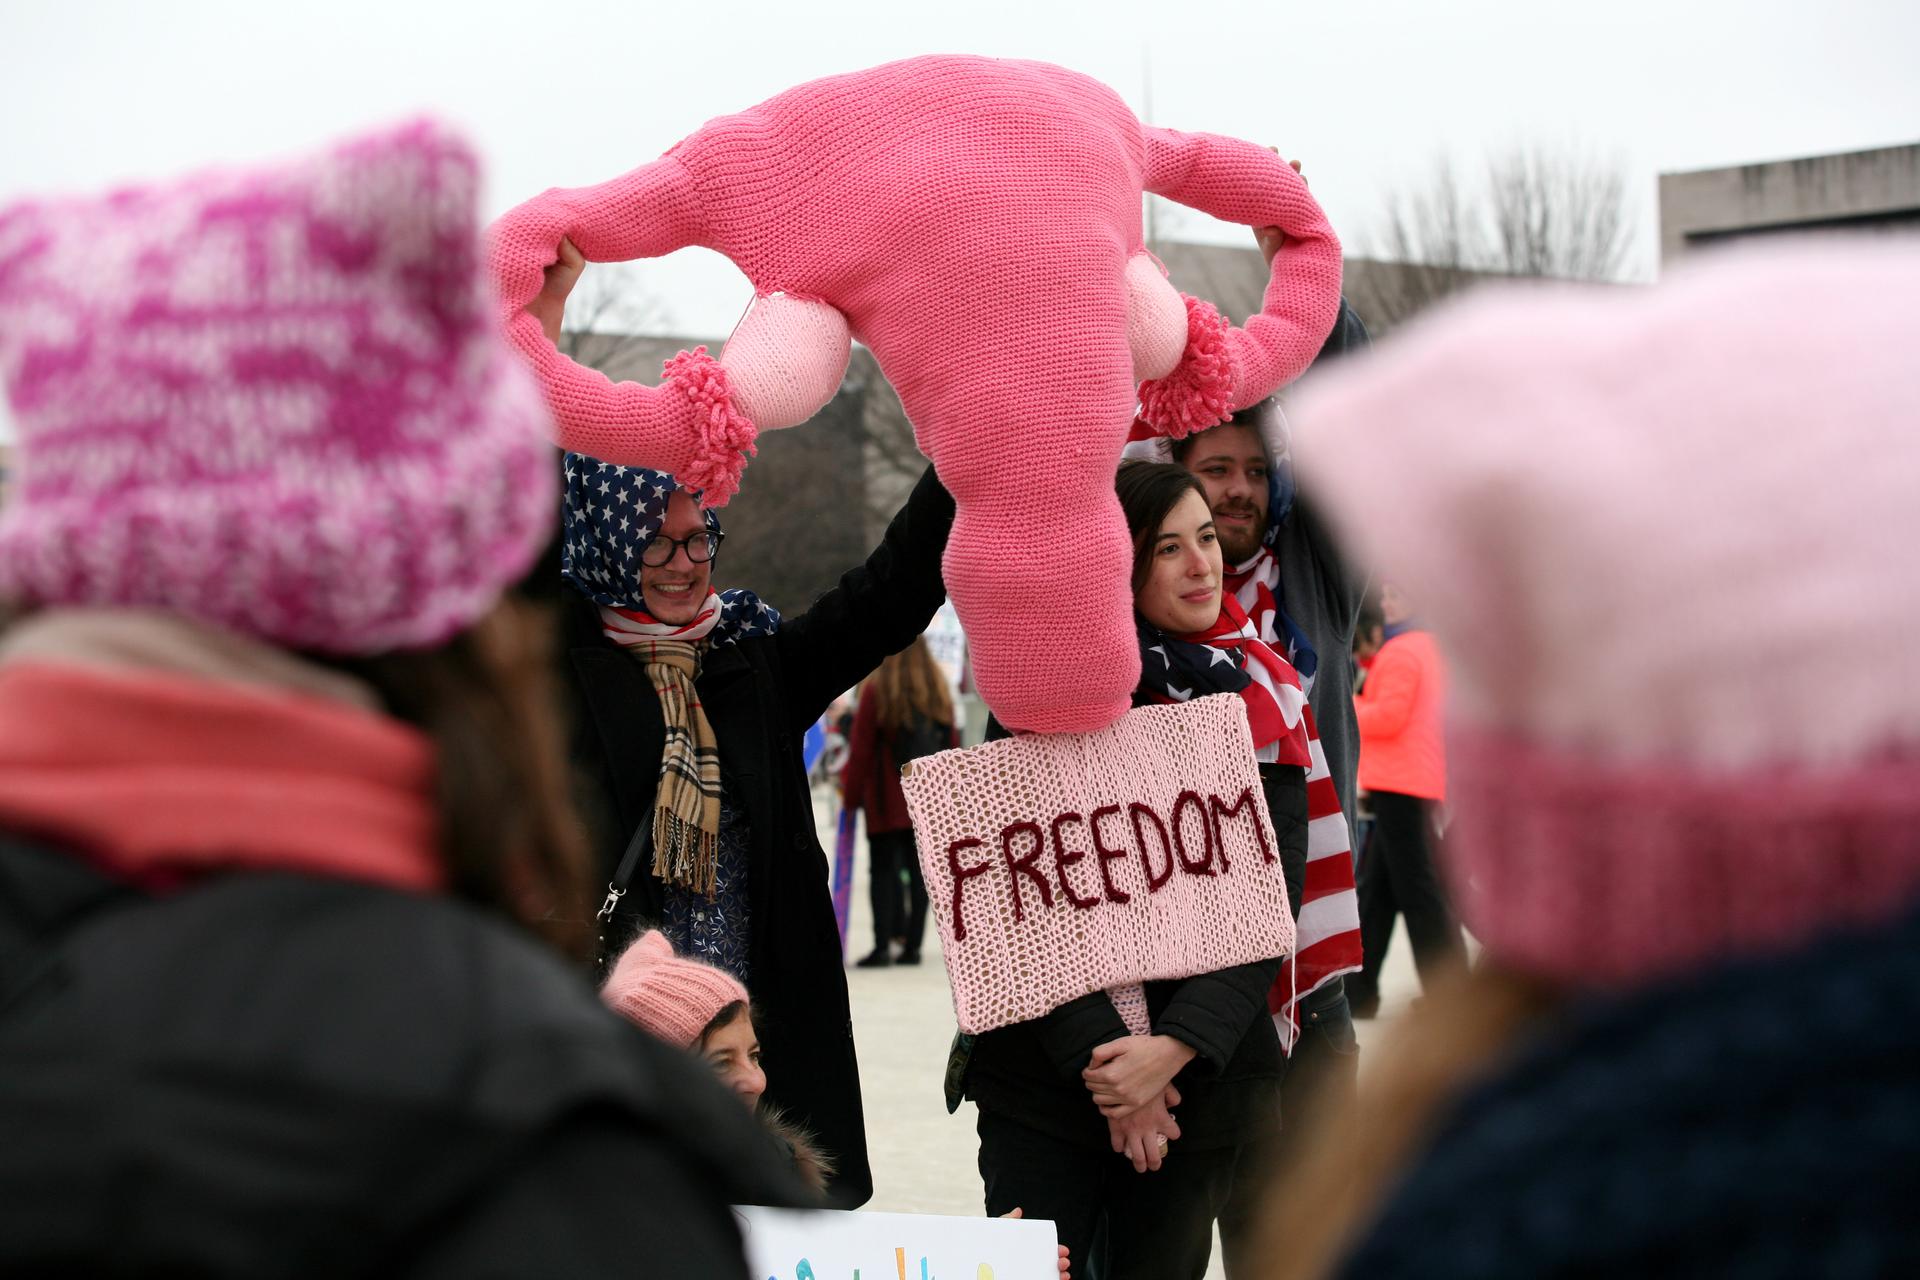 People display a knitted replica of the female reproductive system at the Women's March, held in opposition to the agenda and rhetoric of President Donald Trump in Washington, DC, January 21, 2017.